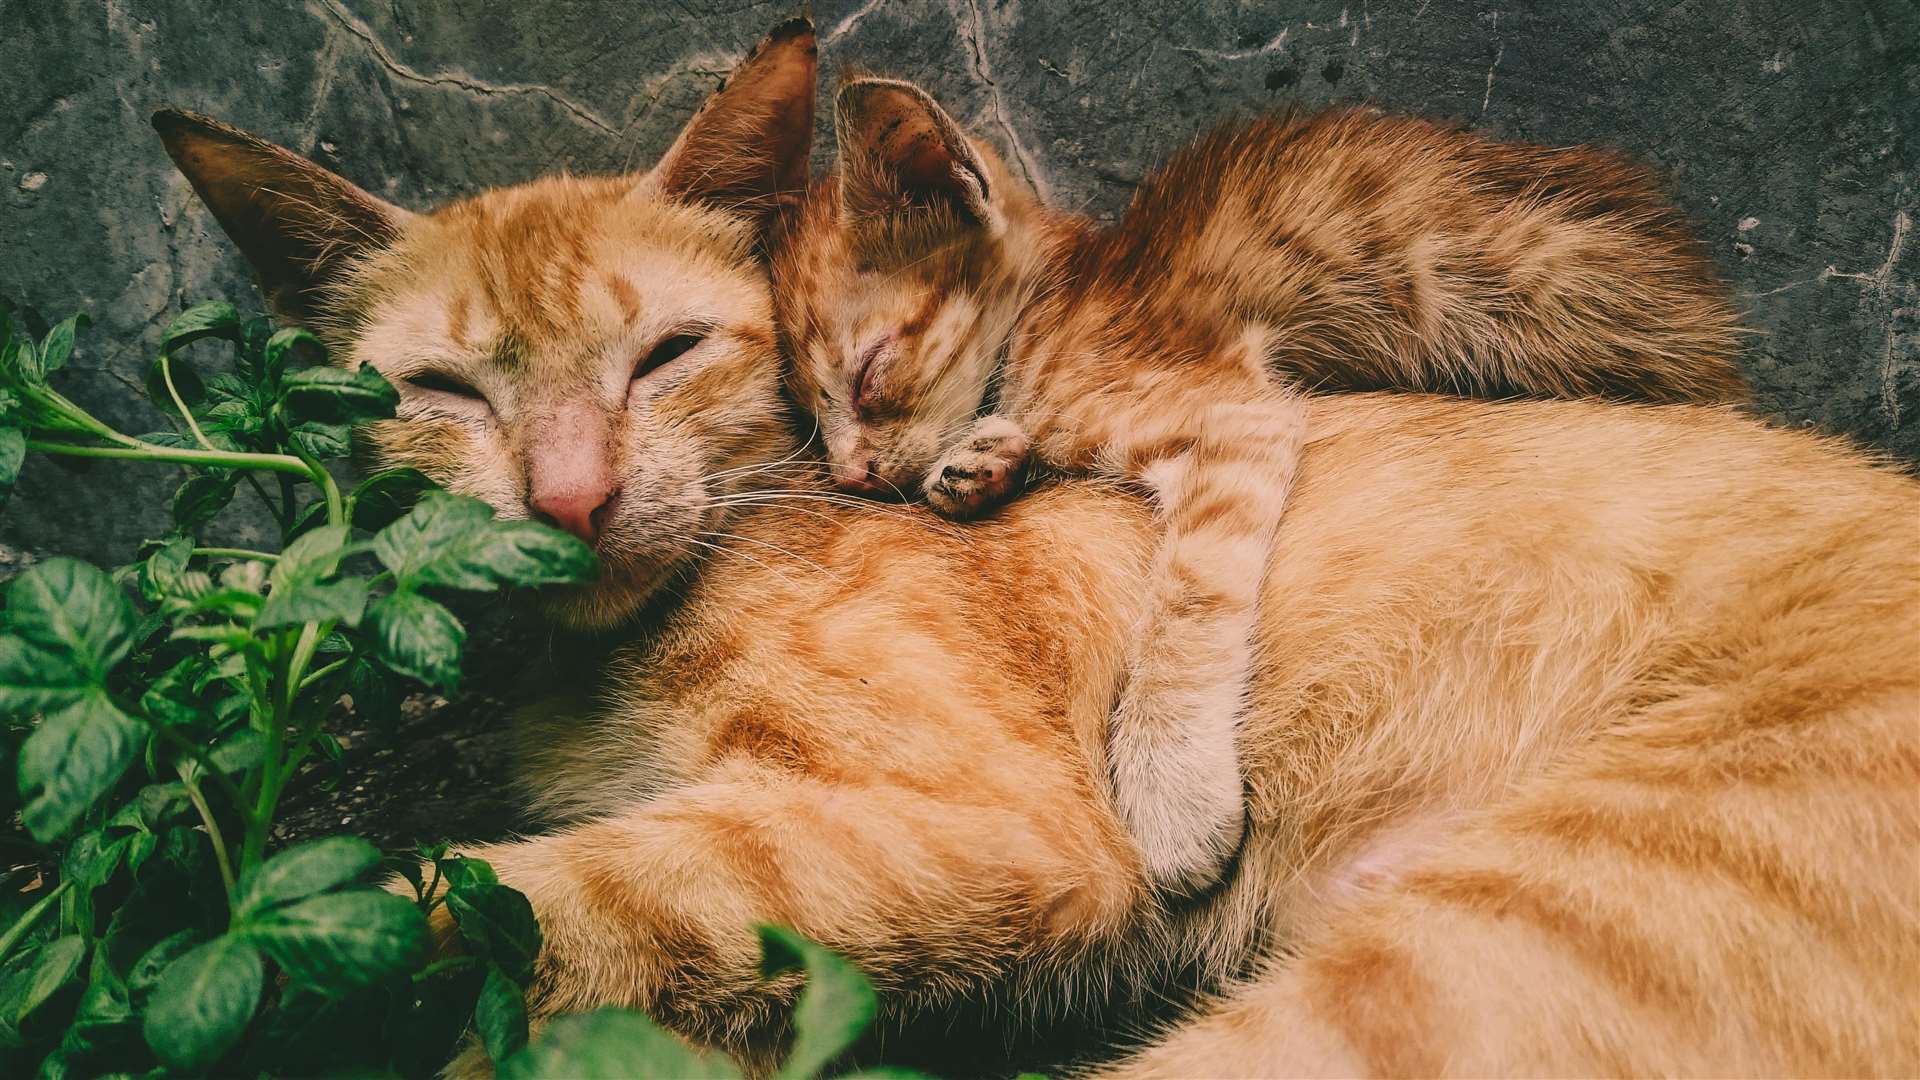 Cats like sleeping with people and other cats because they want extreme warmth, attention and they feel safe around you to be vulnerable. Picture: Mochamad Wildan, Pexels